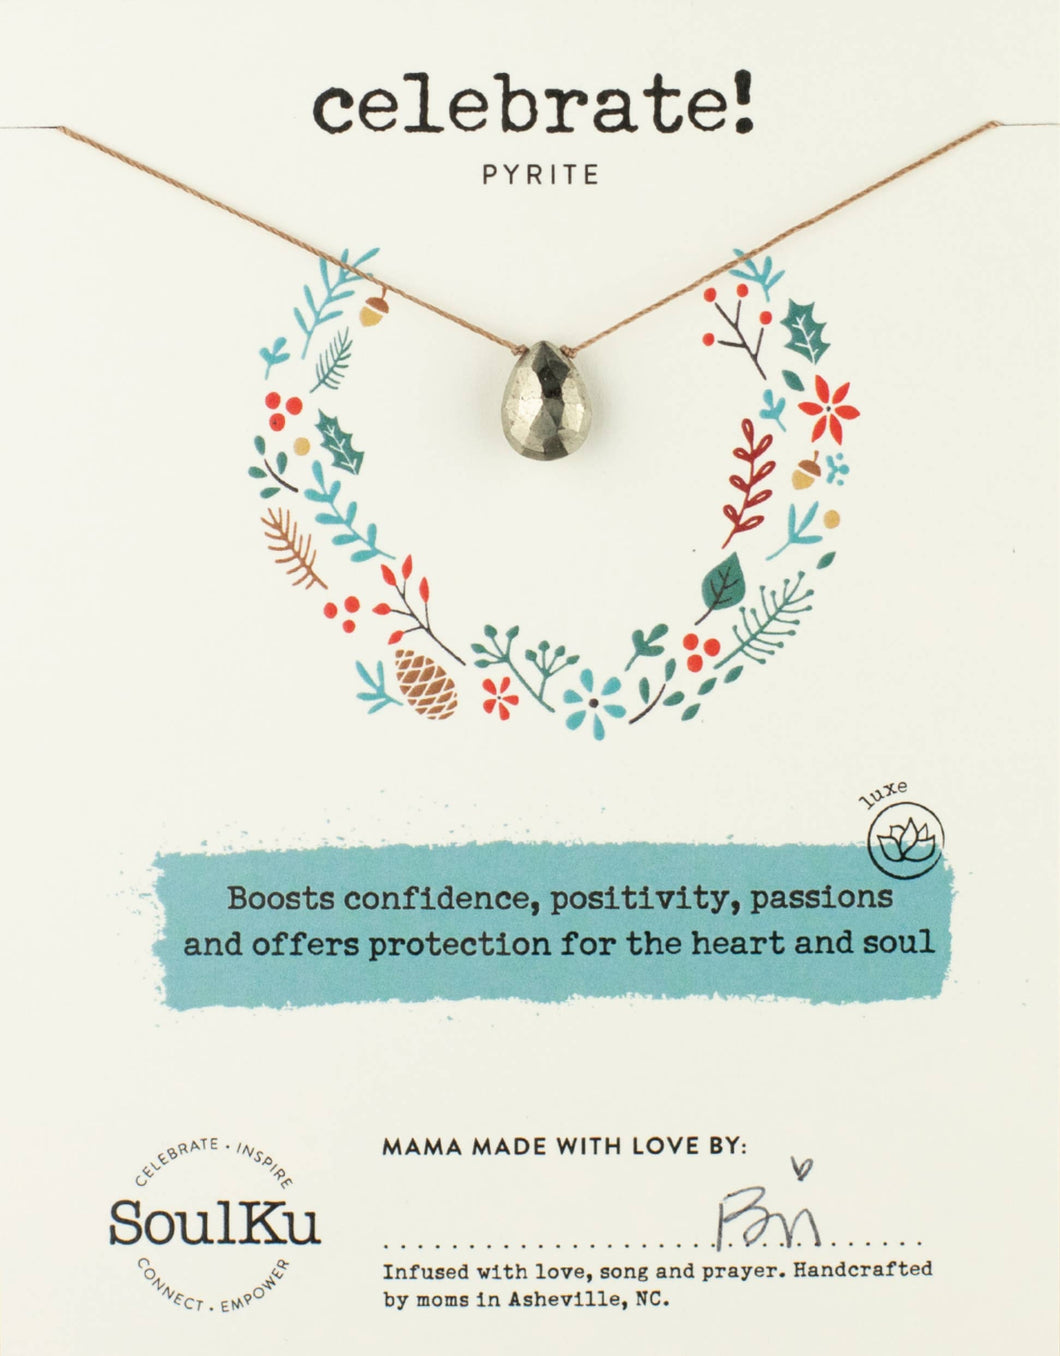 Pyrite Luxe Necklace to Celebrate!